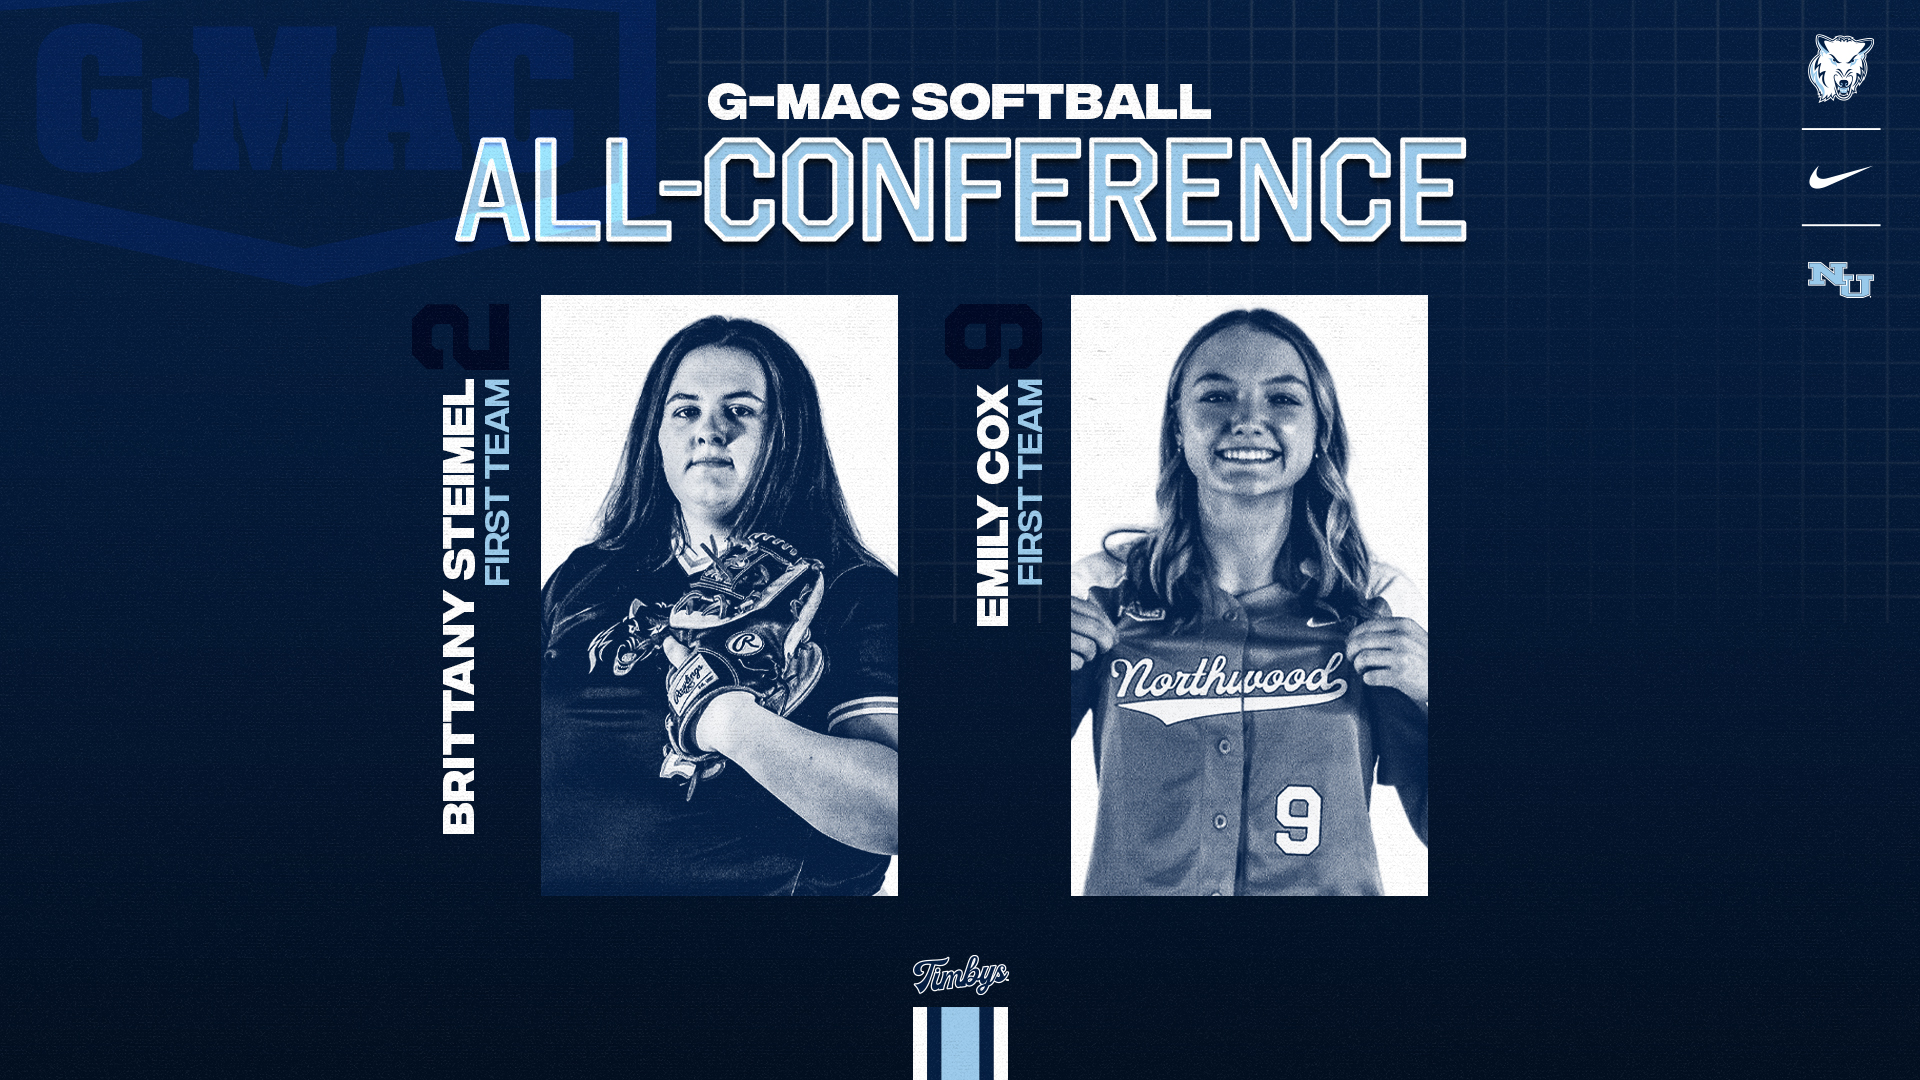 Steimel And Cox Earn First Team All-Conference Honors From The G-MAC